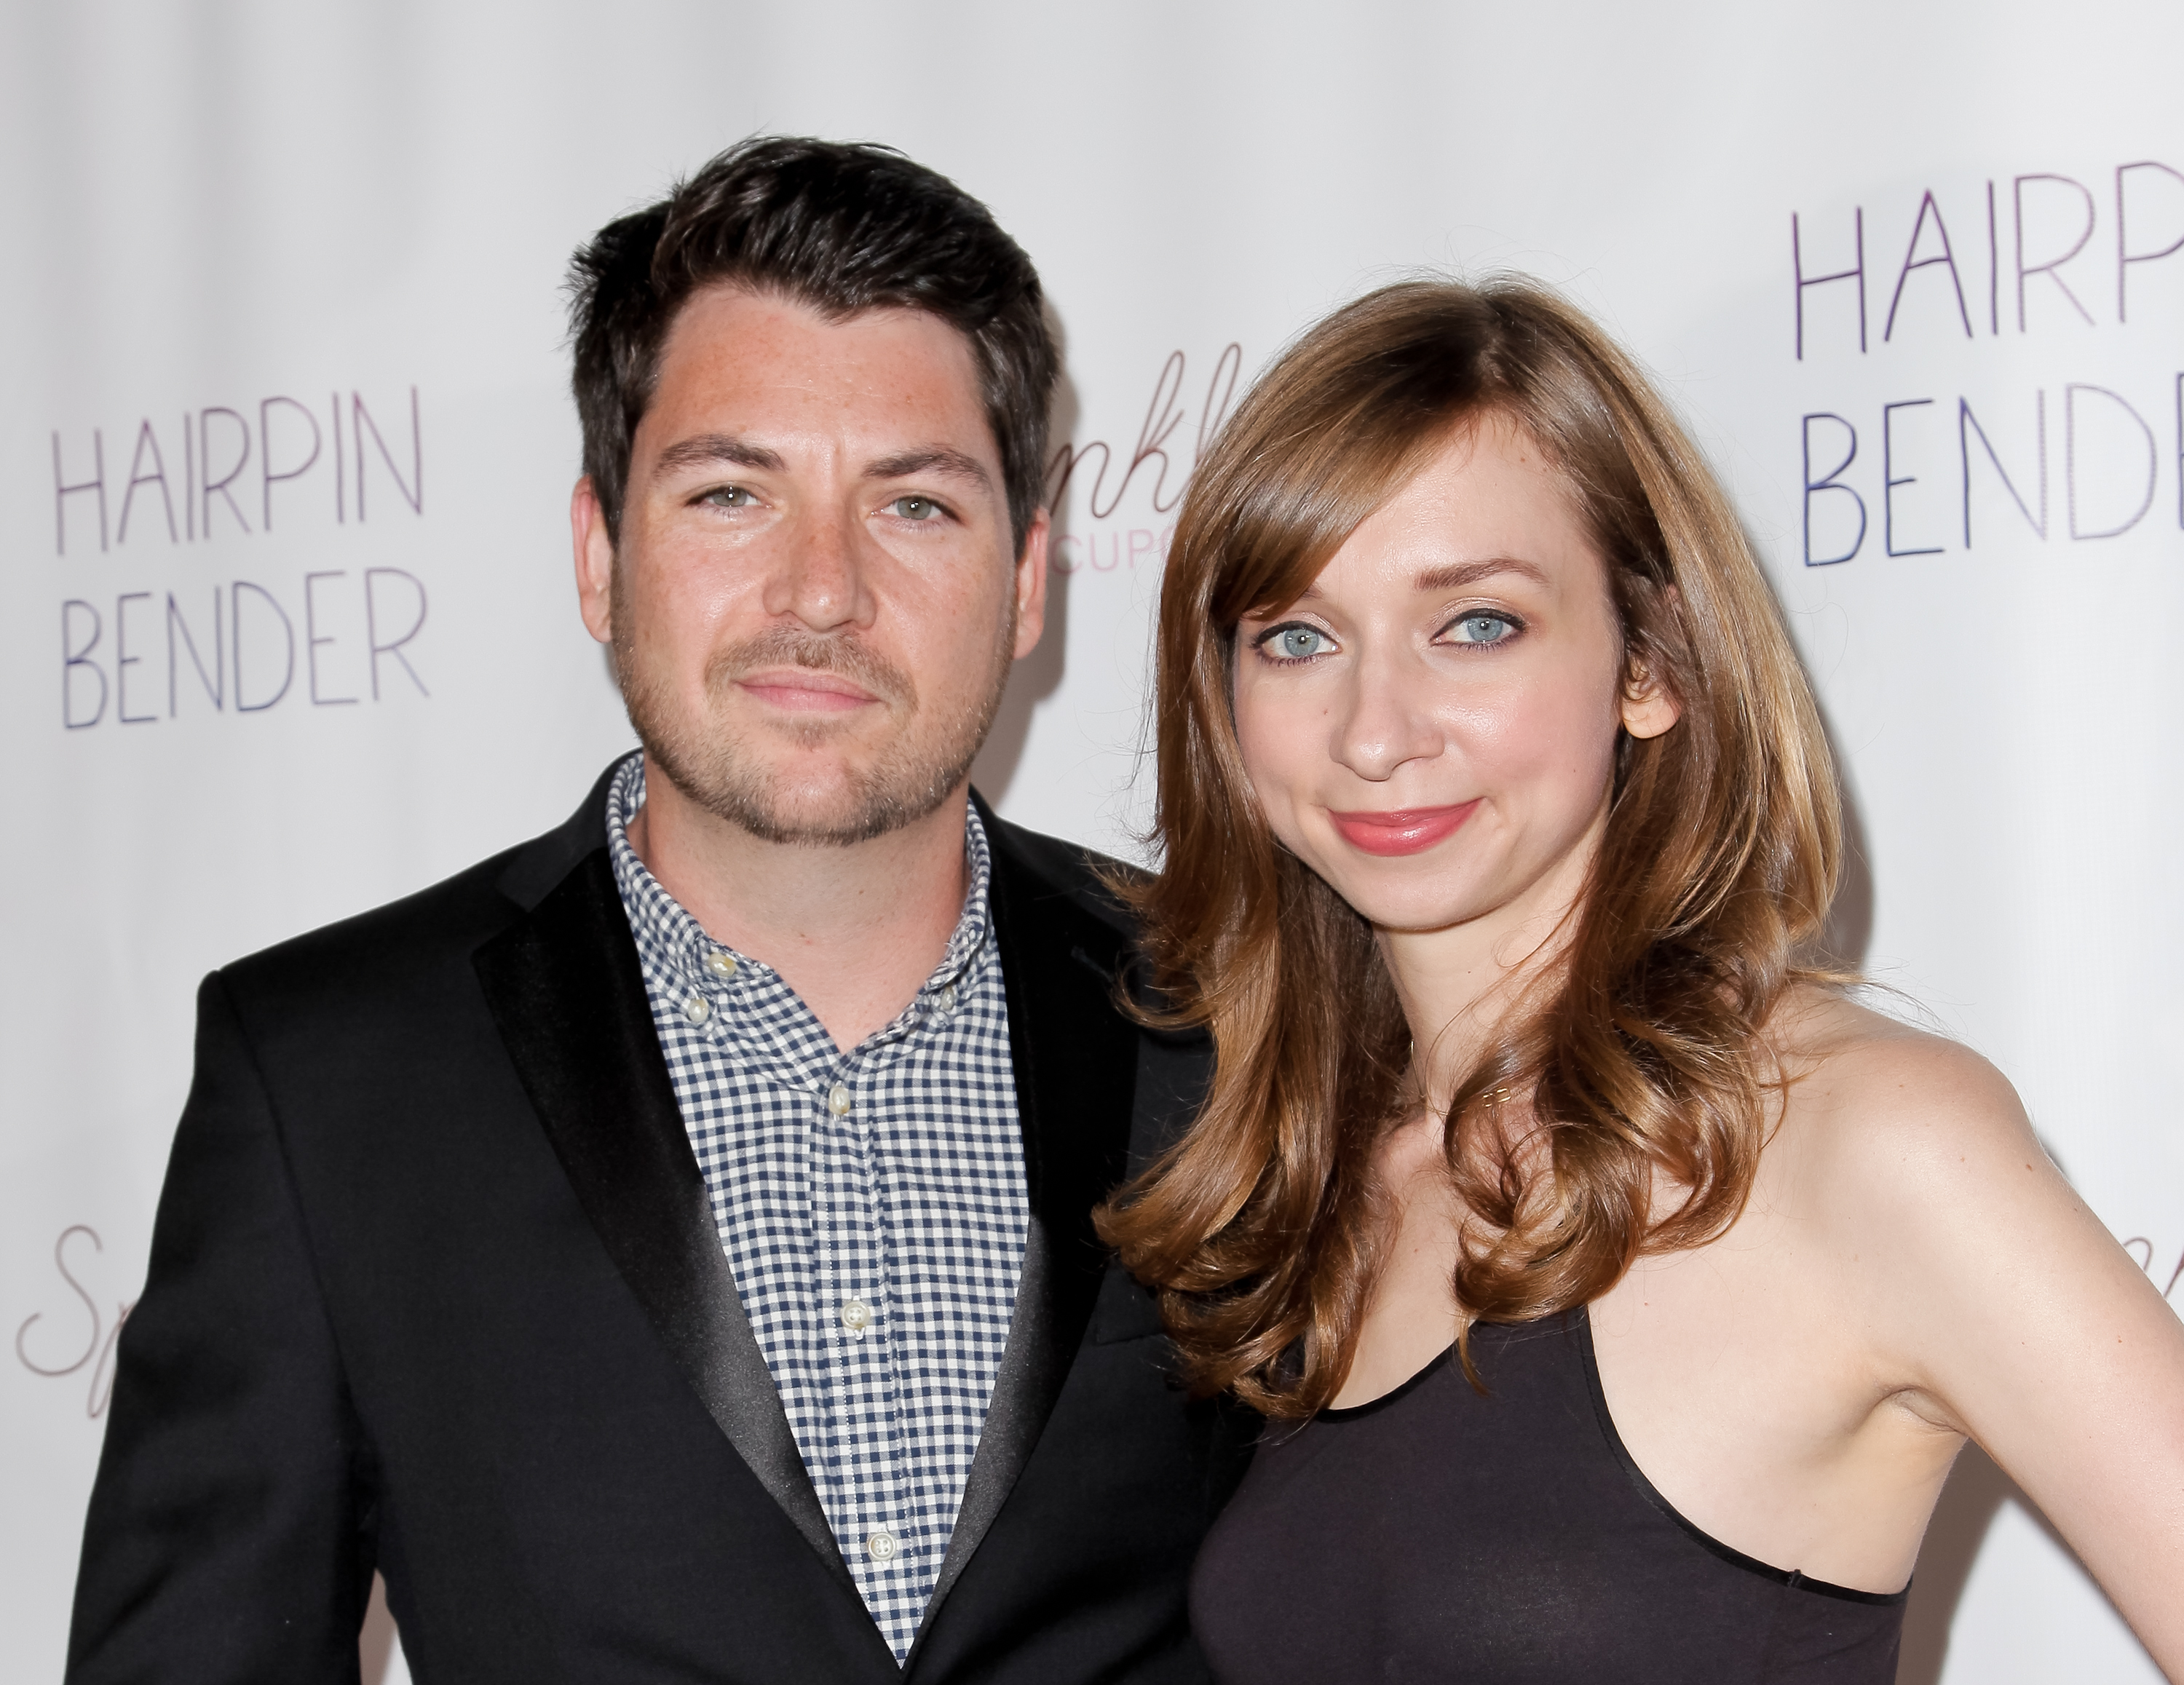 Chris Alvarado and Lauren Lapkus attend the screening of "Hairpin Bender" at Downtown Independent Theater on September 28, 2015 in Los Angeles, California | Source: Getty Images